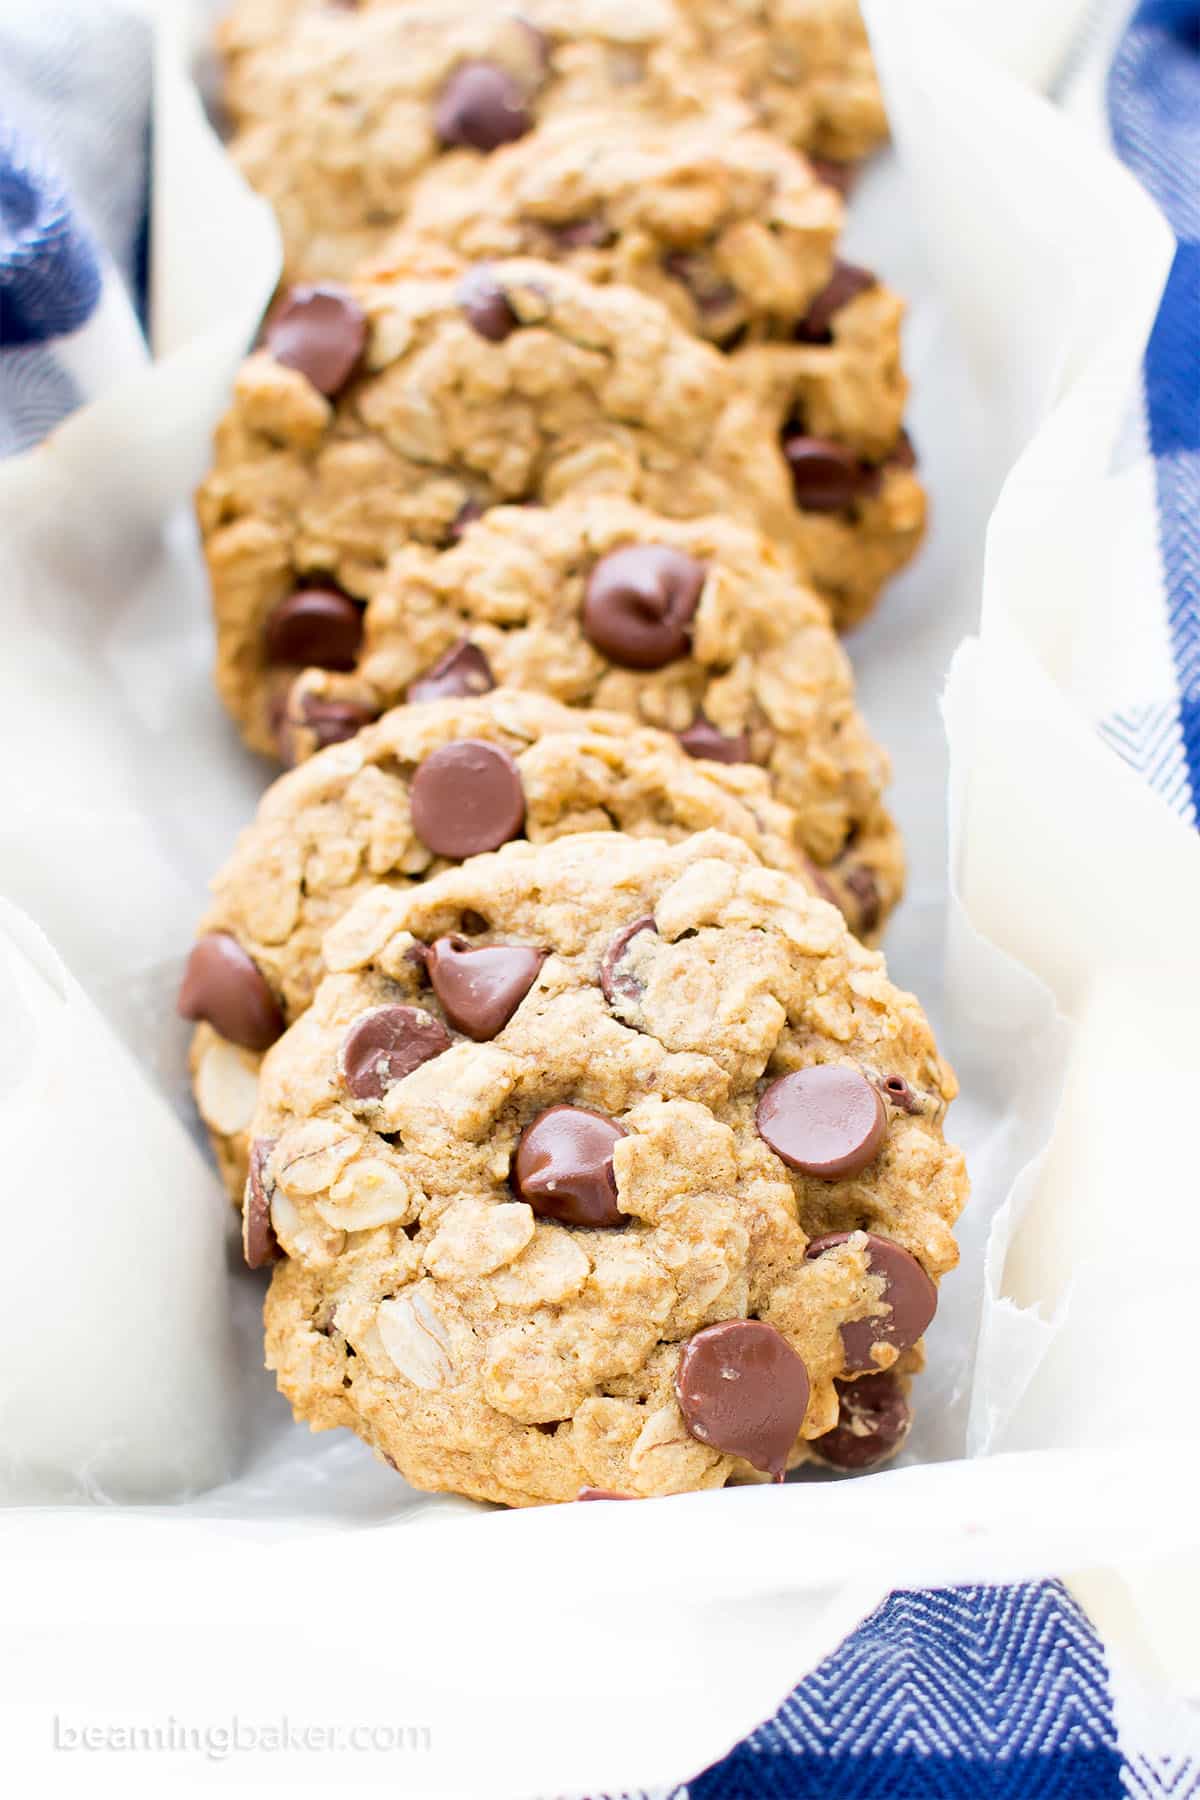 Gluten Free Vegan Oatmeal Chocolate Chip Cookies (GF): a simple vegan oatmeal chocolate chip cookies recipe that yields soft & buttery oatmeal cookies packed with melty chocolate chips! Dairy-Free, Refined Sugar-Free. #OatmealCookies #GlutenFree #Vegan #ChocolateChip | Recipe at BeamingBaker.com